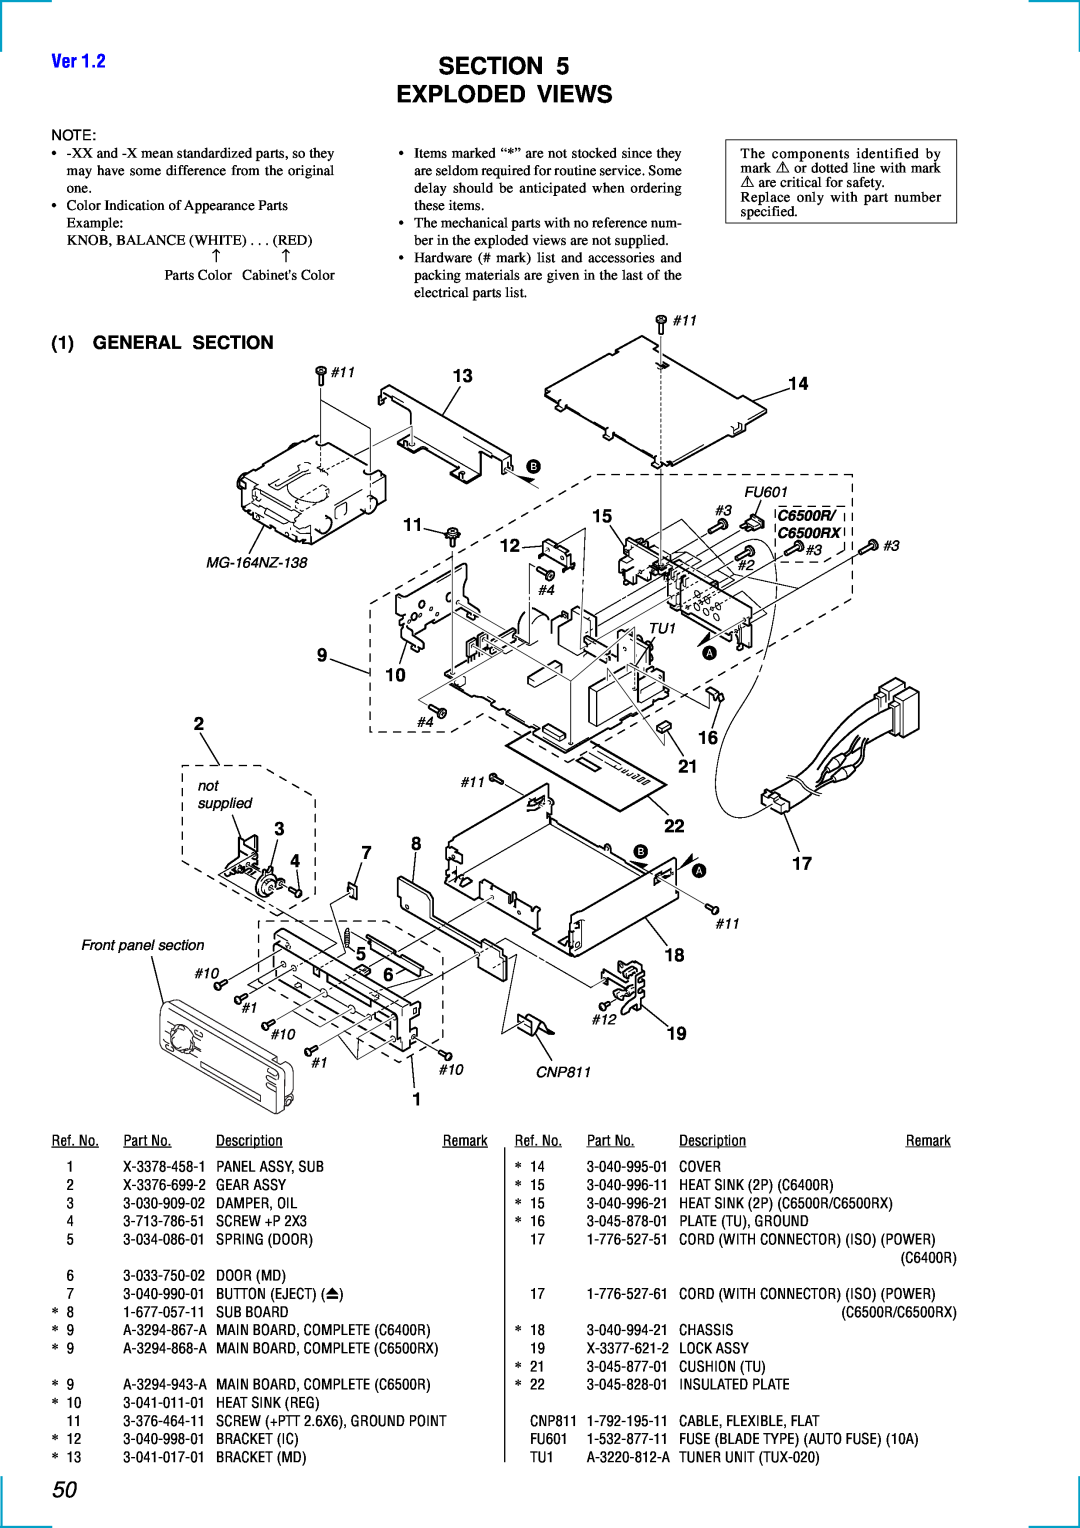 Sony MDX-C6500RX service manual Section Exploded Views, 1GENERAL SECTION 